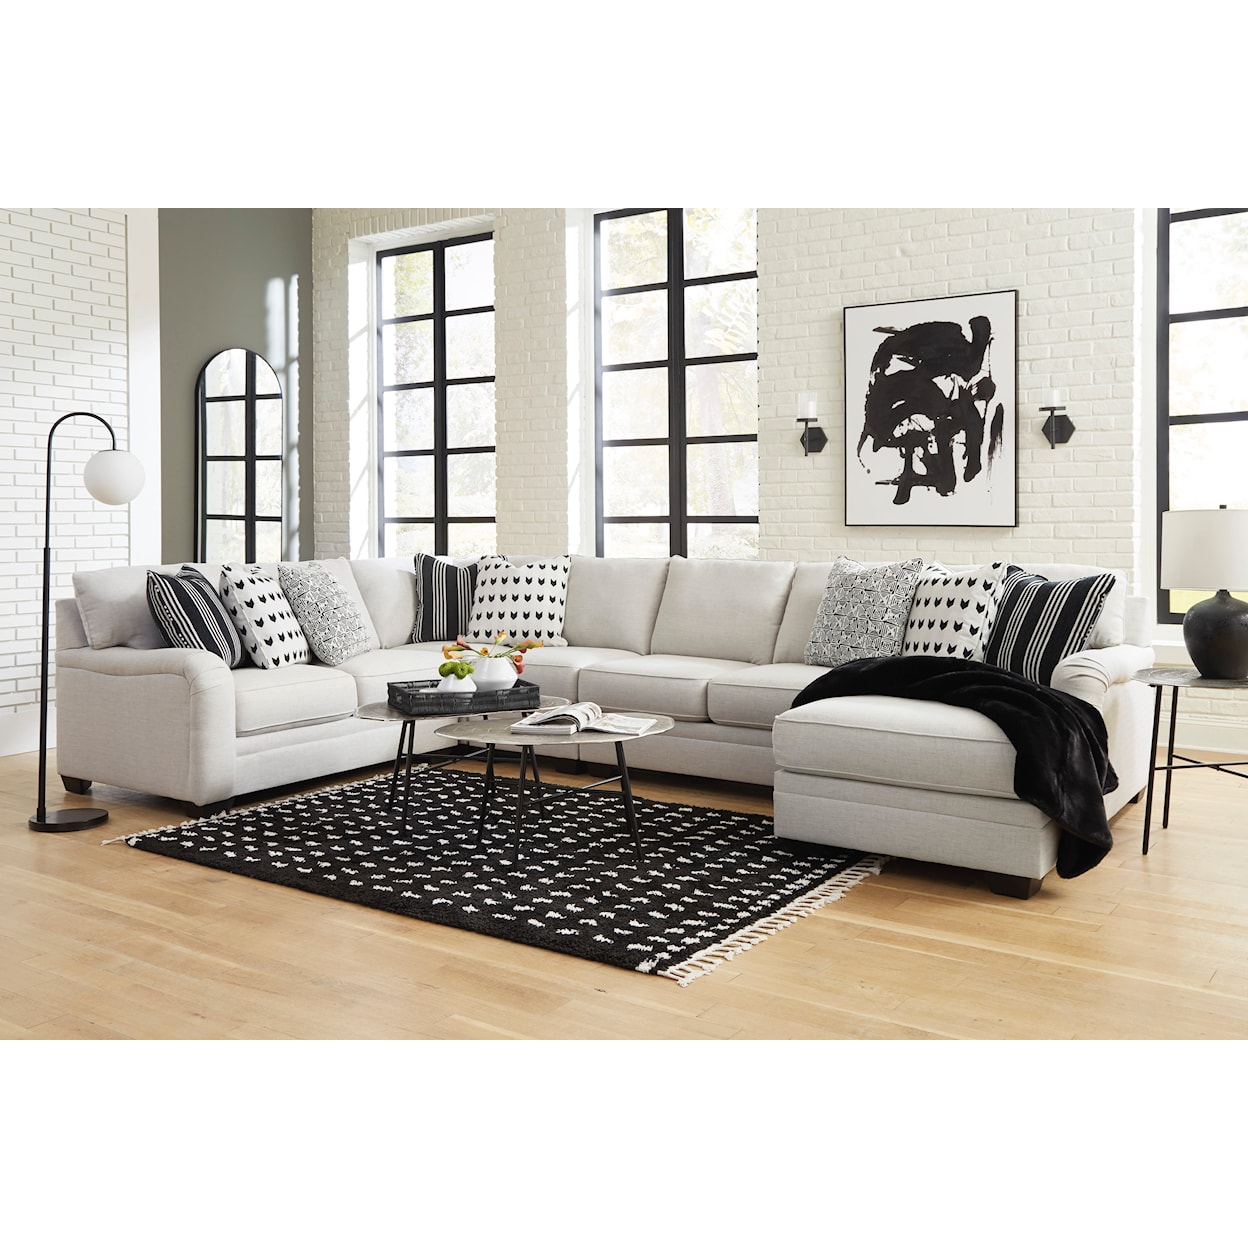 Benchcraft Huntsworth 5-Piece Sectional with Chaise